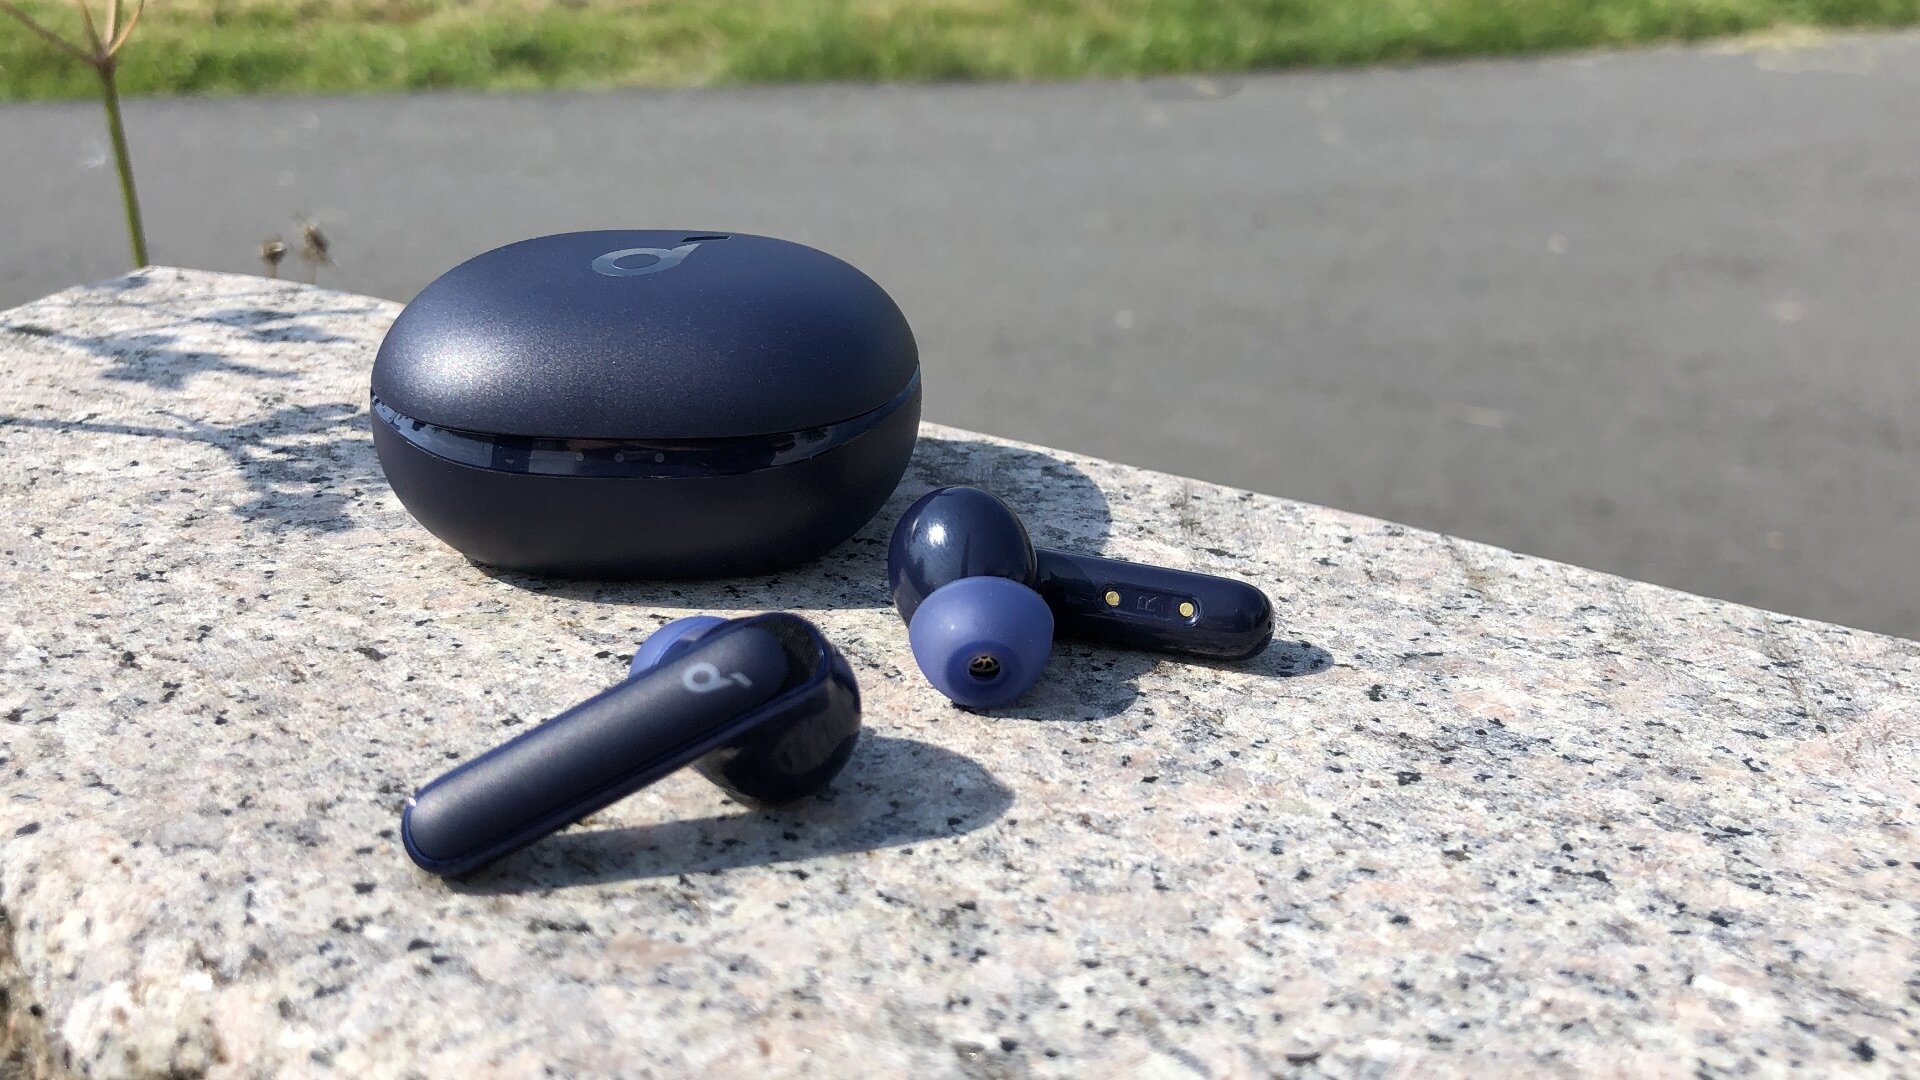 Soundcore Life P3 review: Better than Liberty Air Pro?